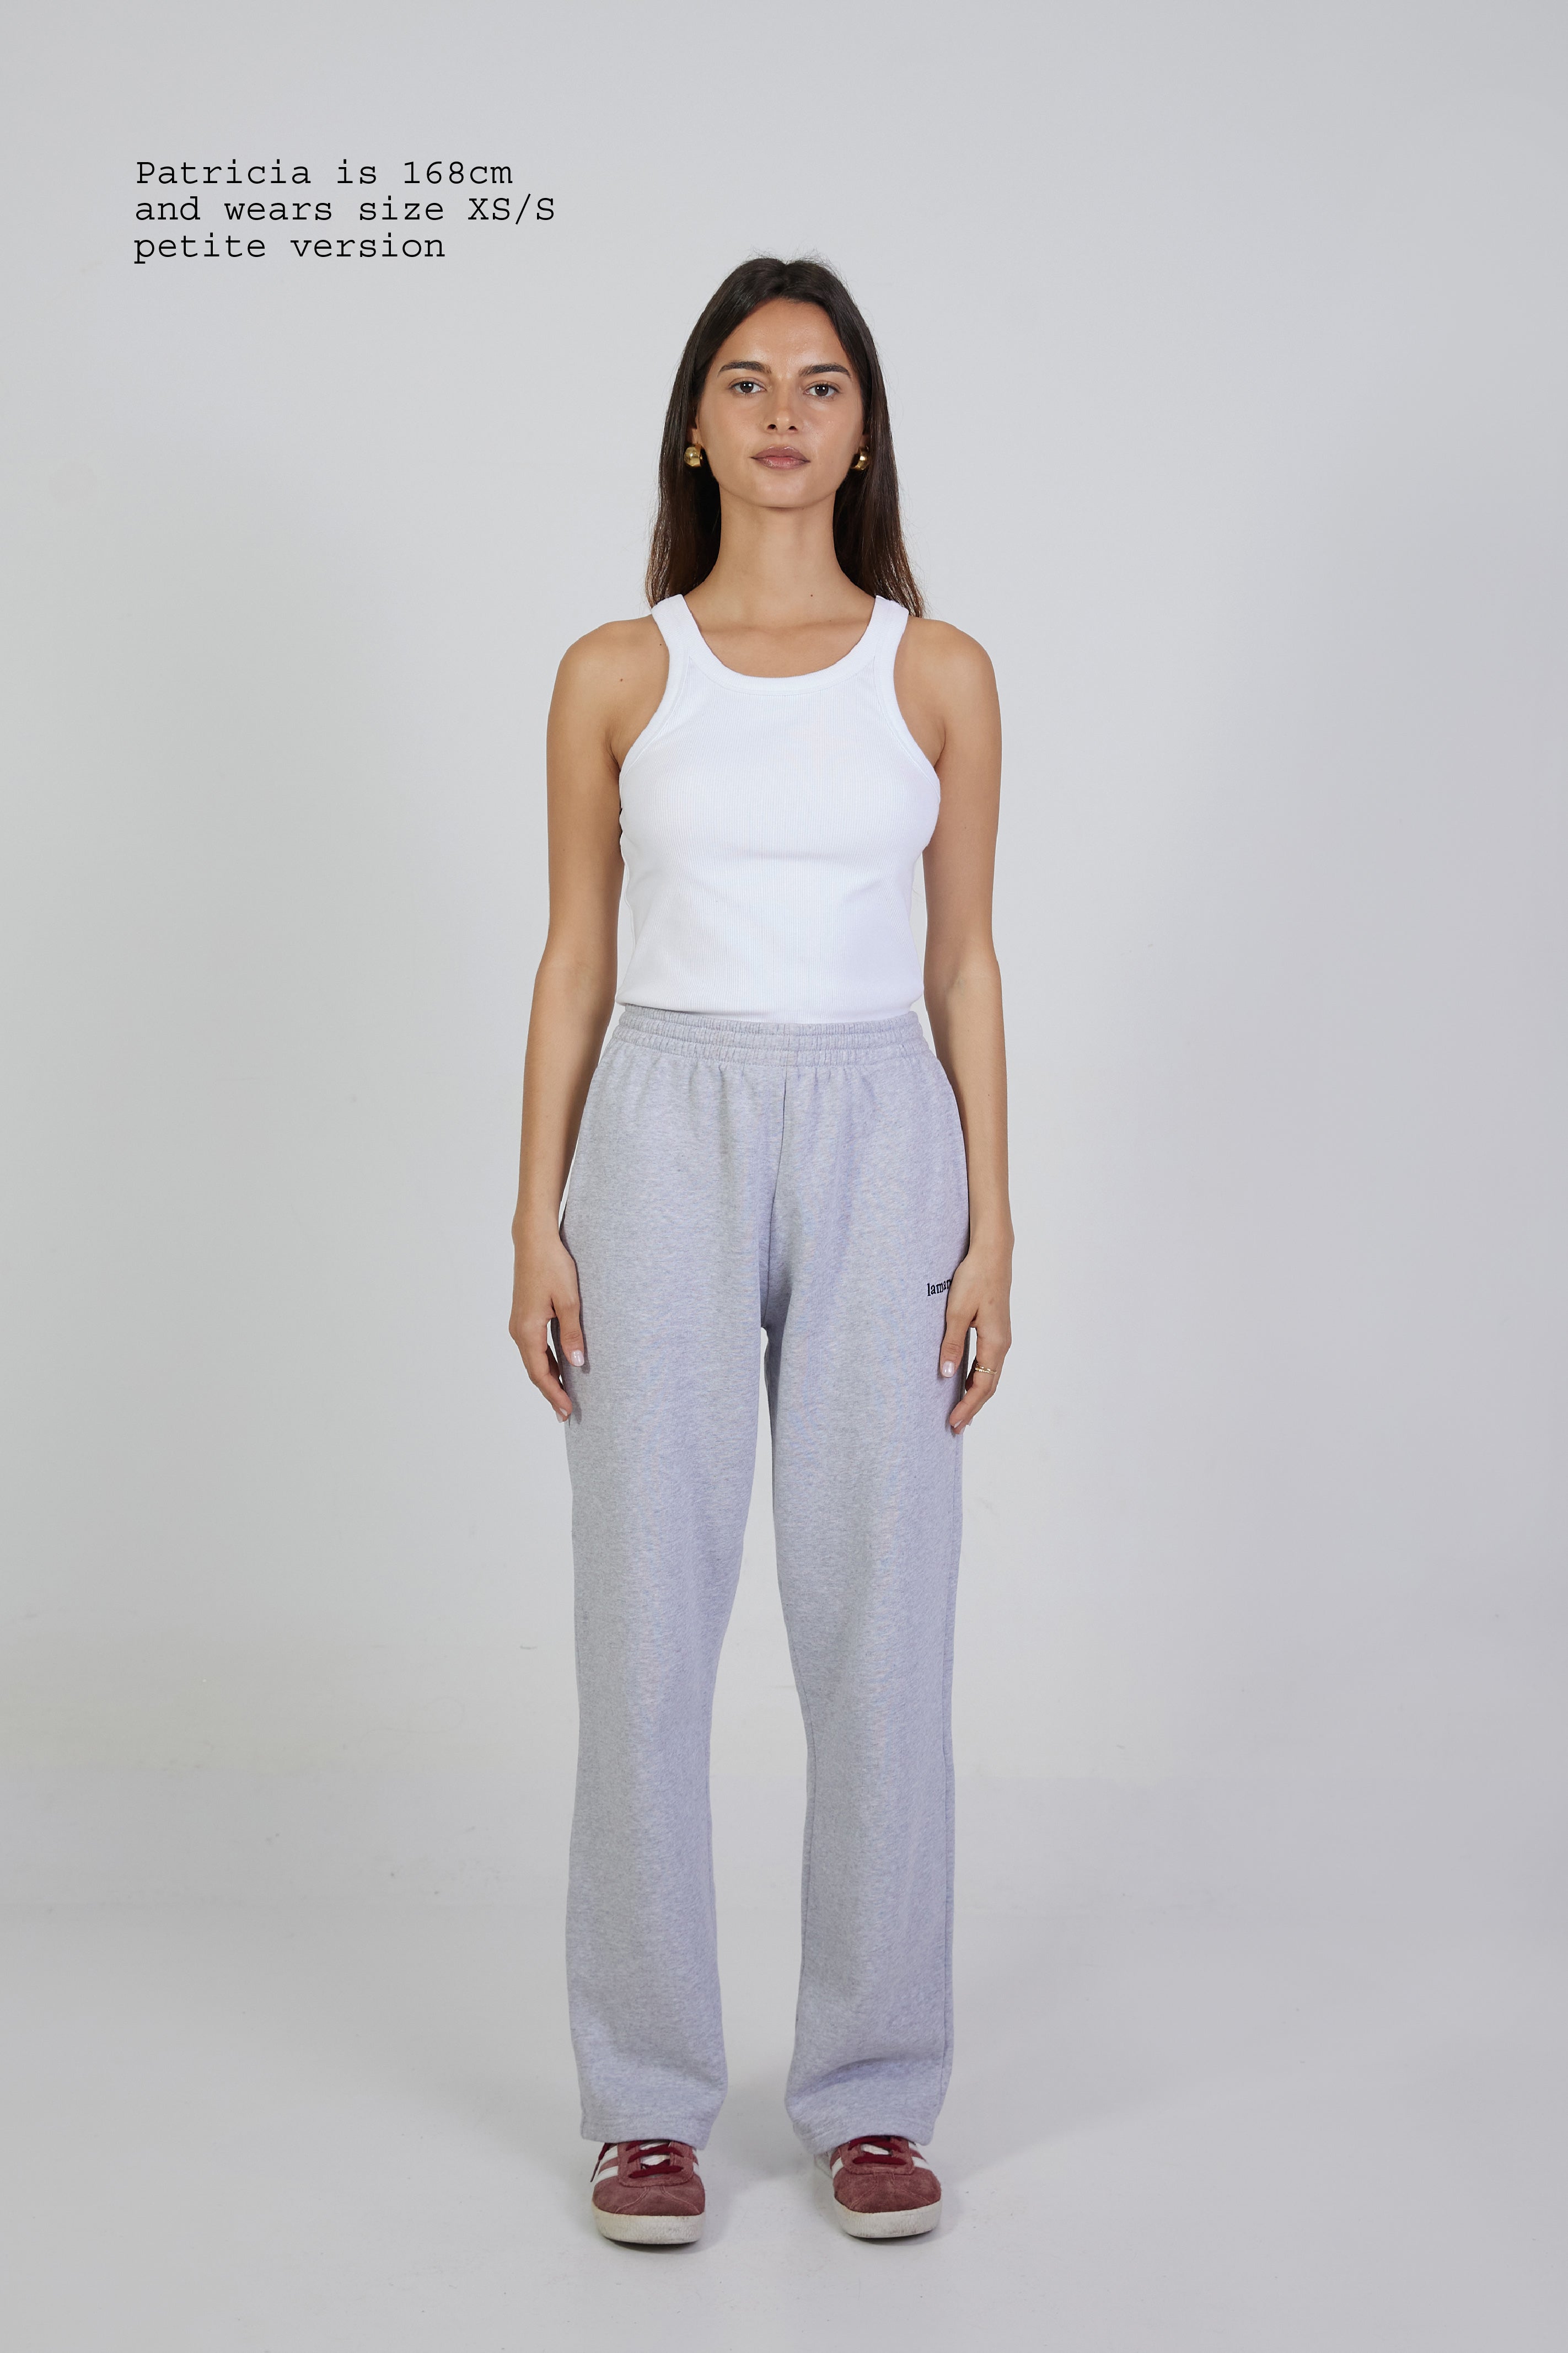 ASOS PETITE Straight Leg Track Pants with Side Stripes and Ring Pulls | ASOS